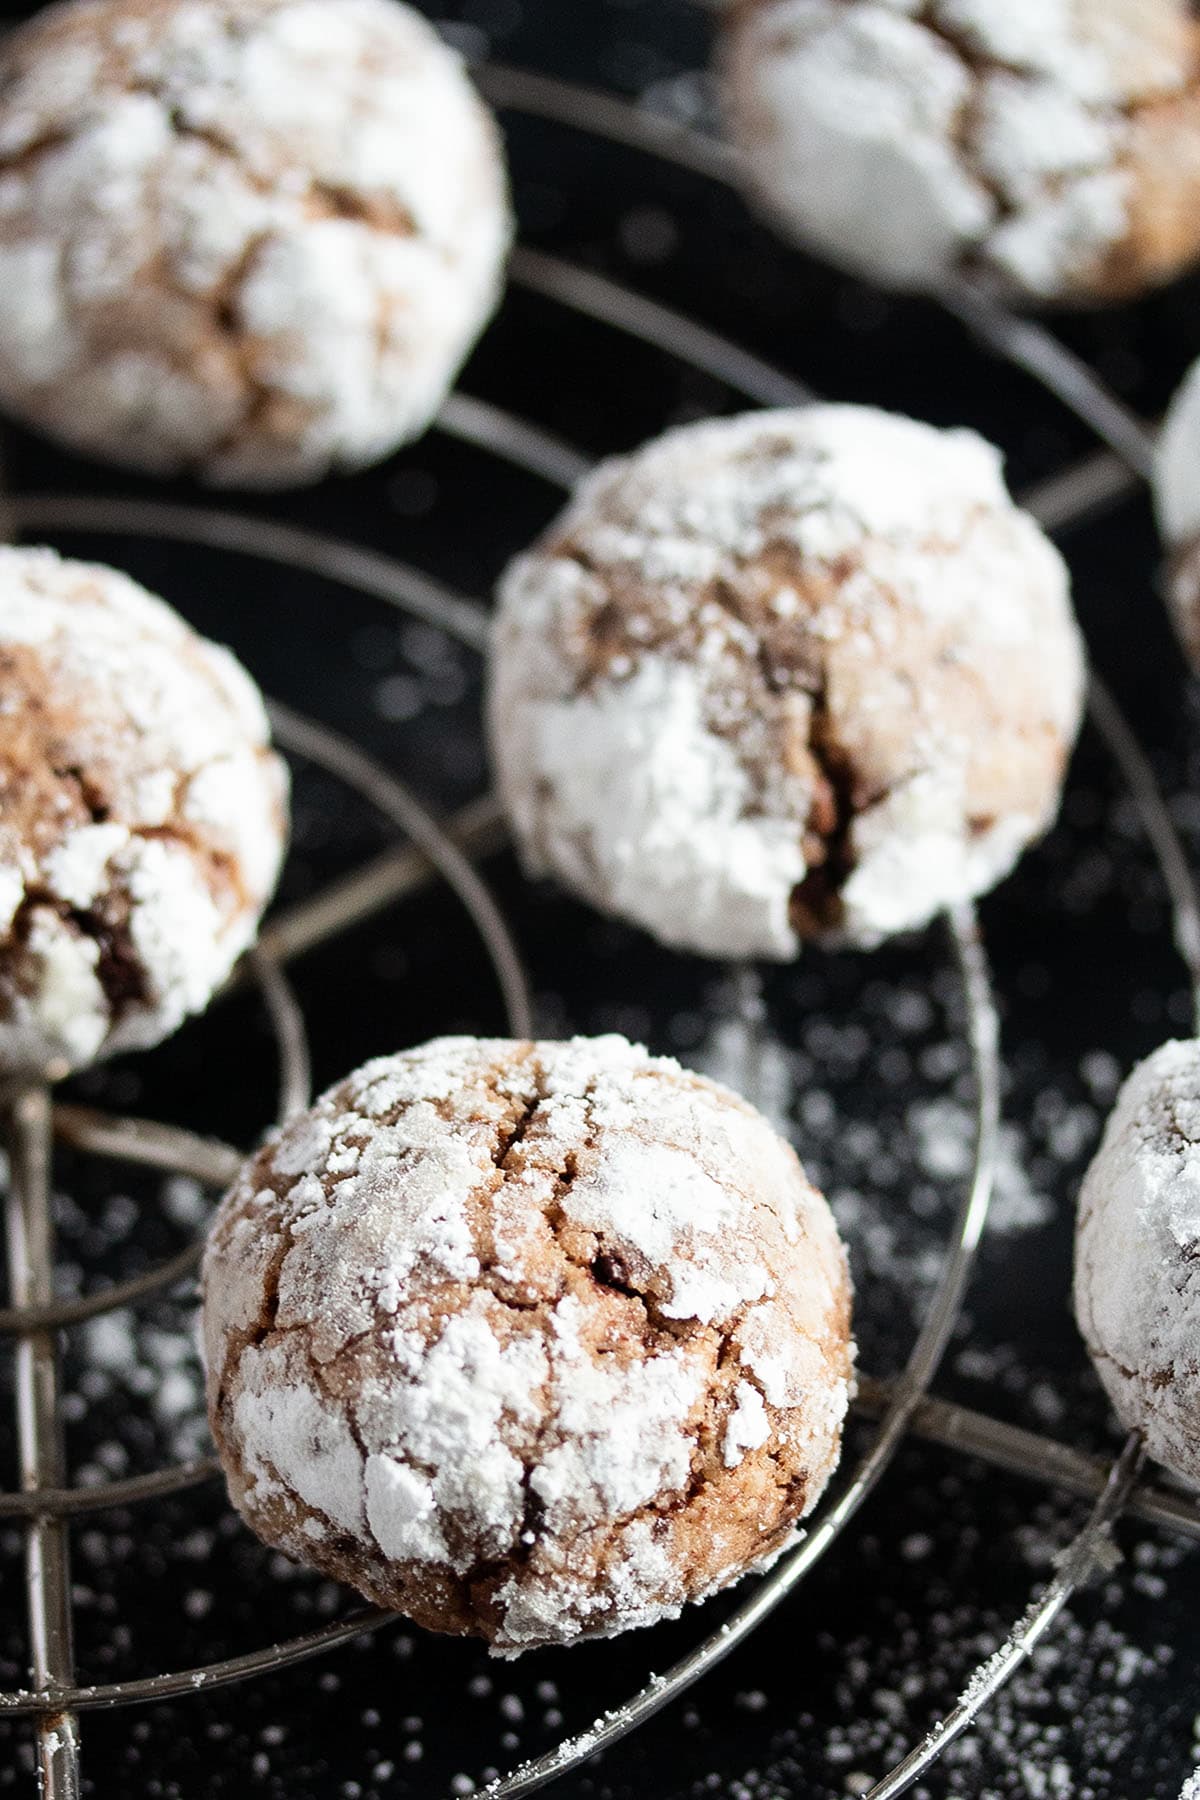 many chocolate almond cookies dusted with icing sugar on a wire rack.